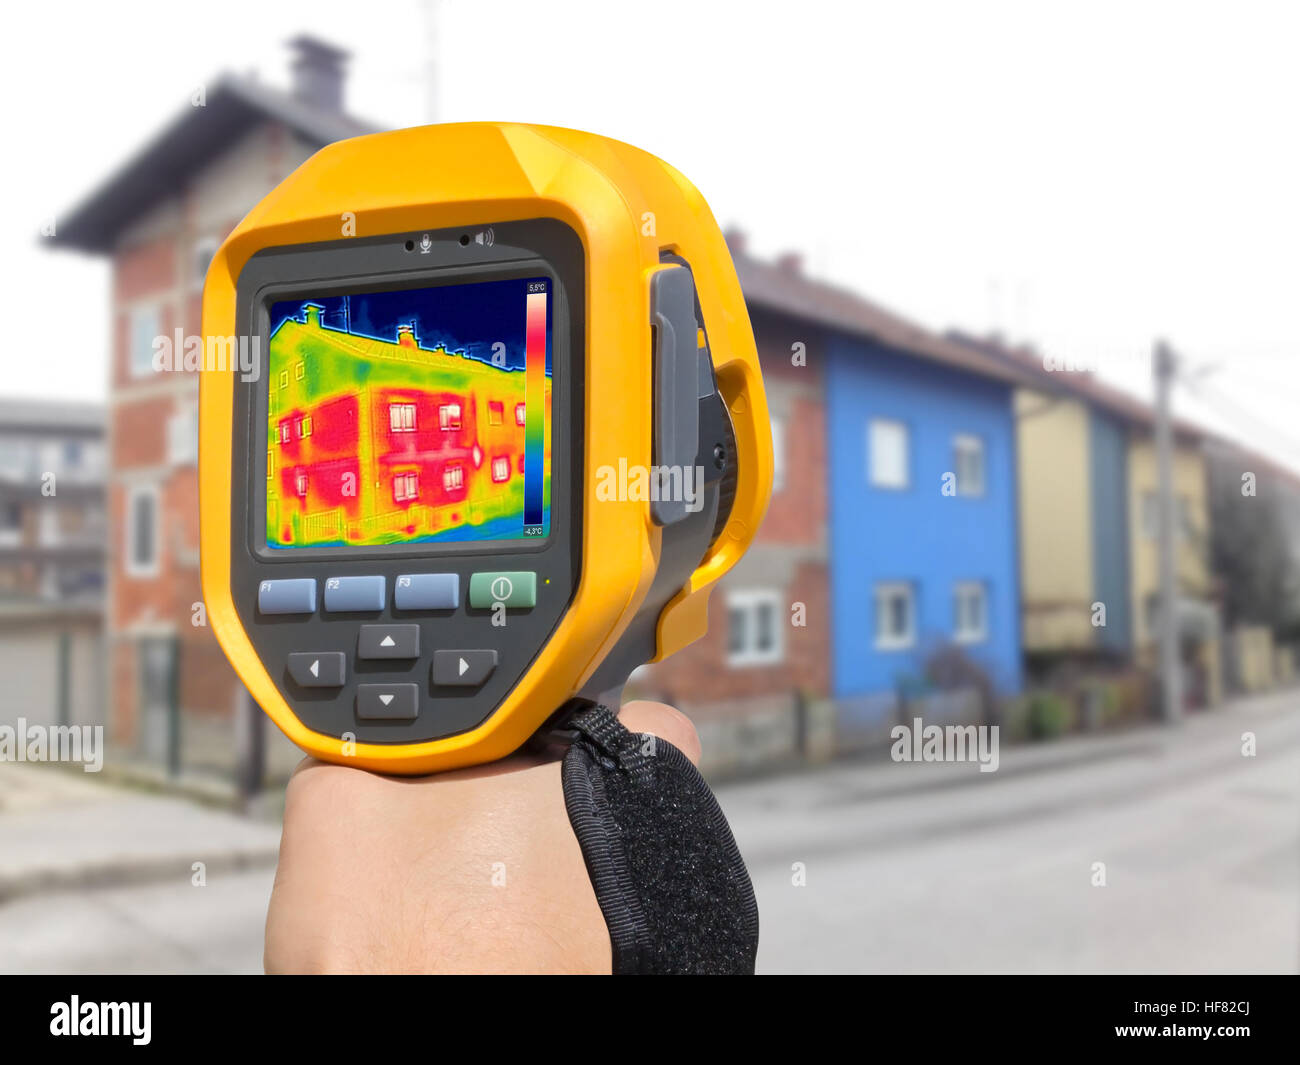 Recording Heat Loss at the House with or without facade With Infrared Thermal Camera Stock Photo